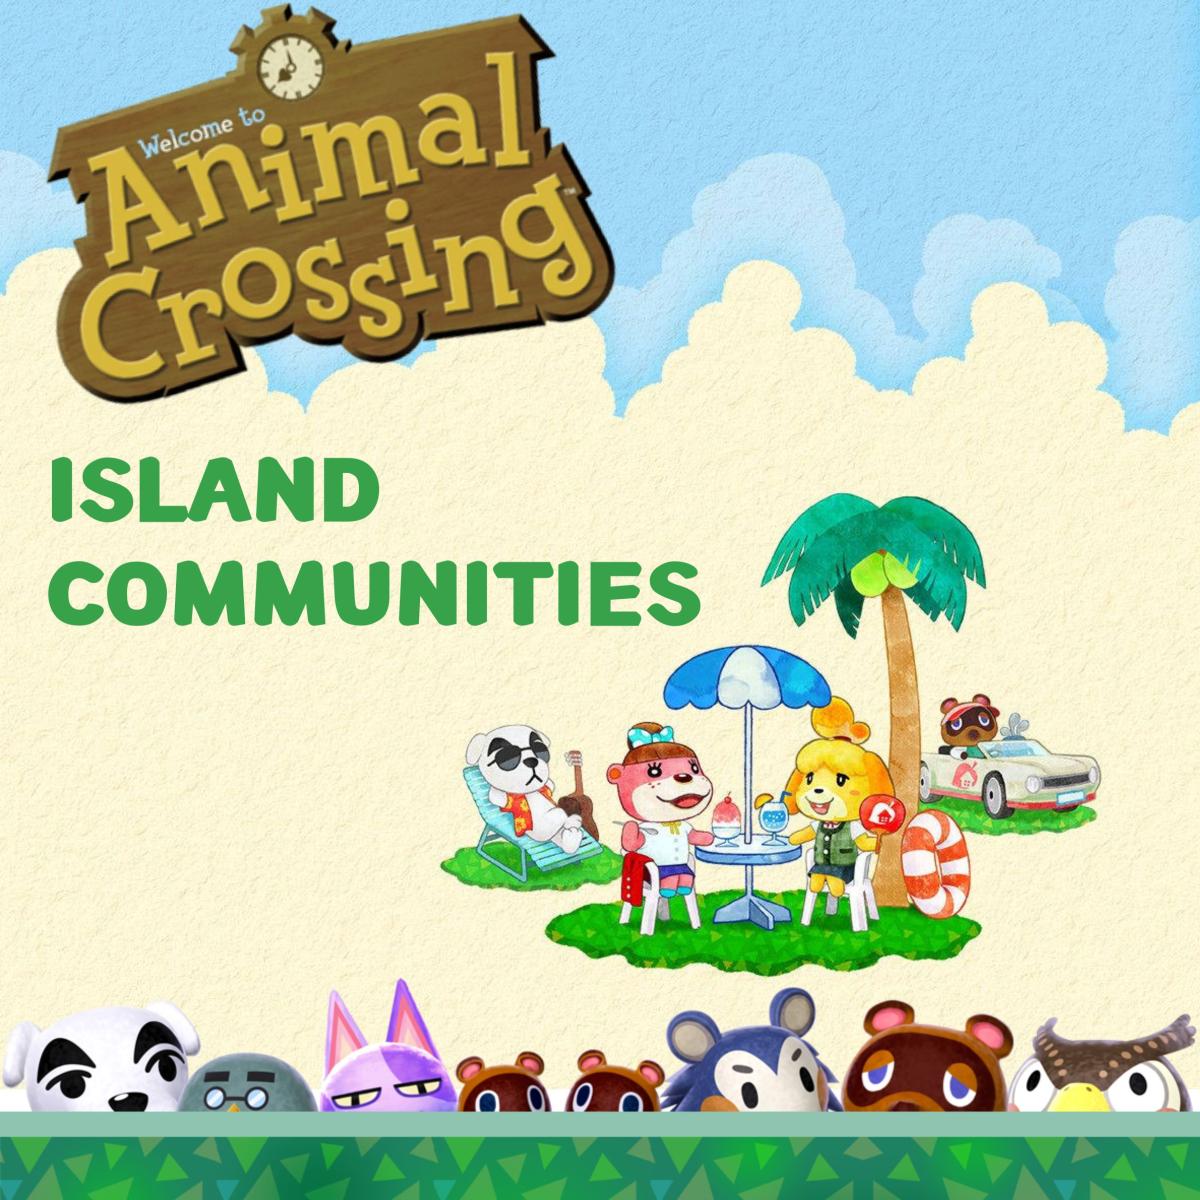 Animal Crossing logo and characters